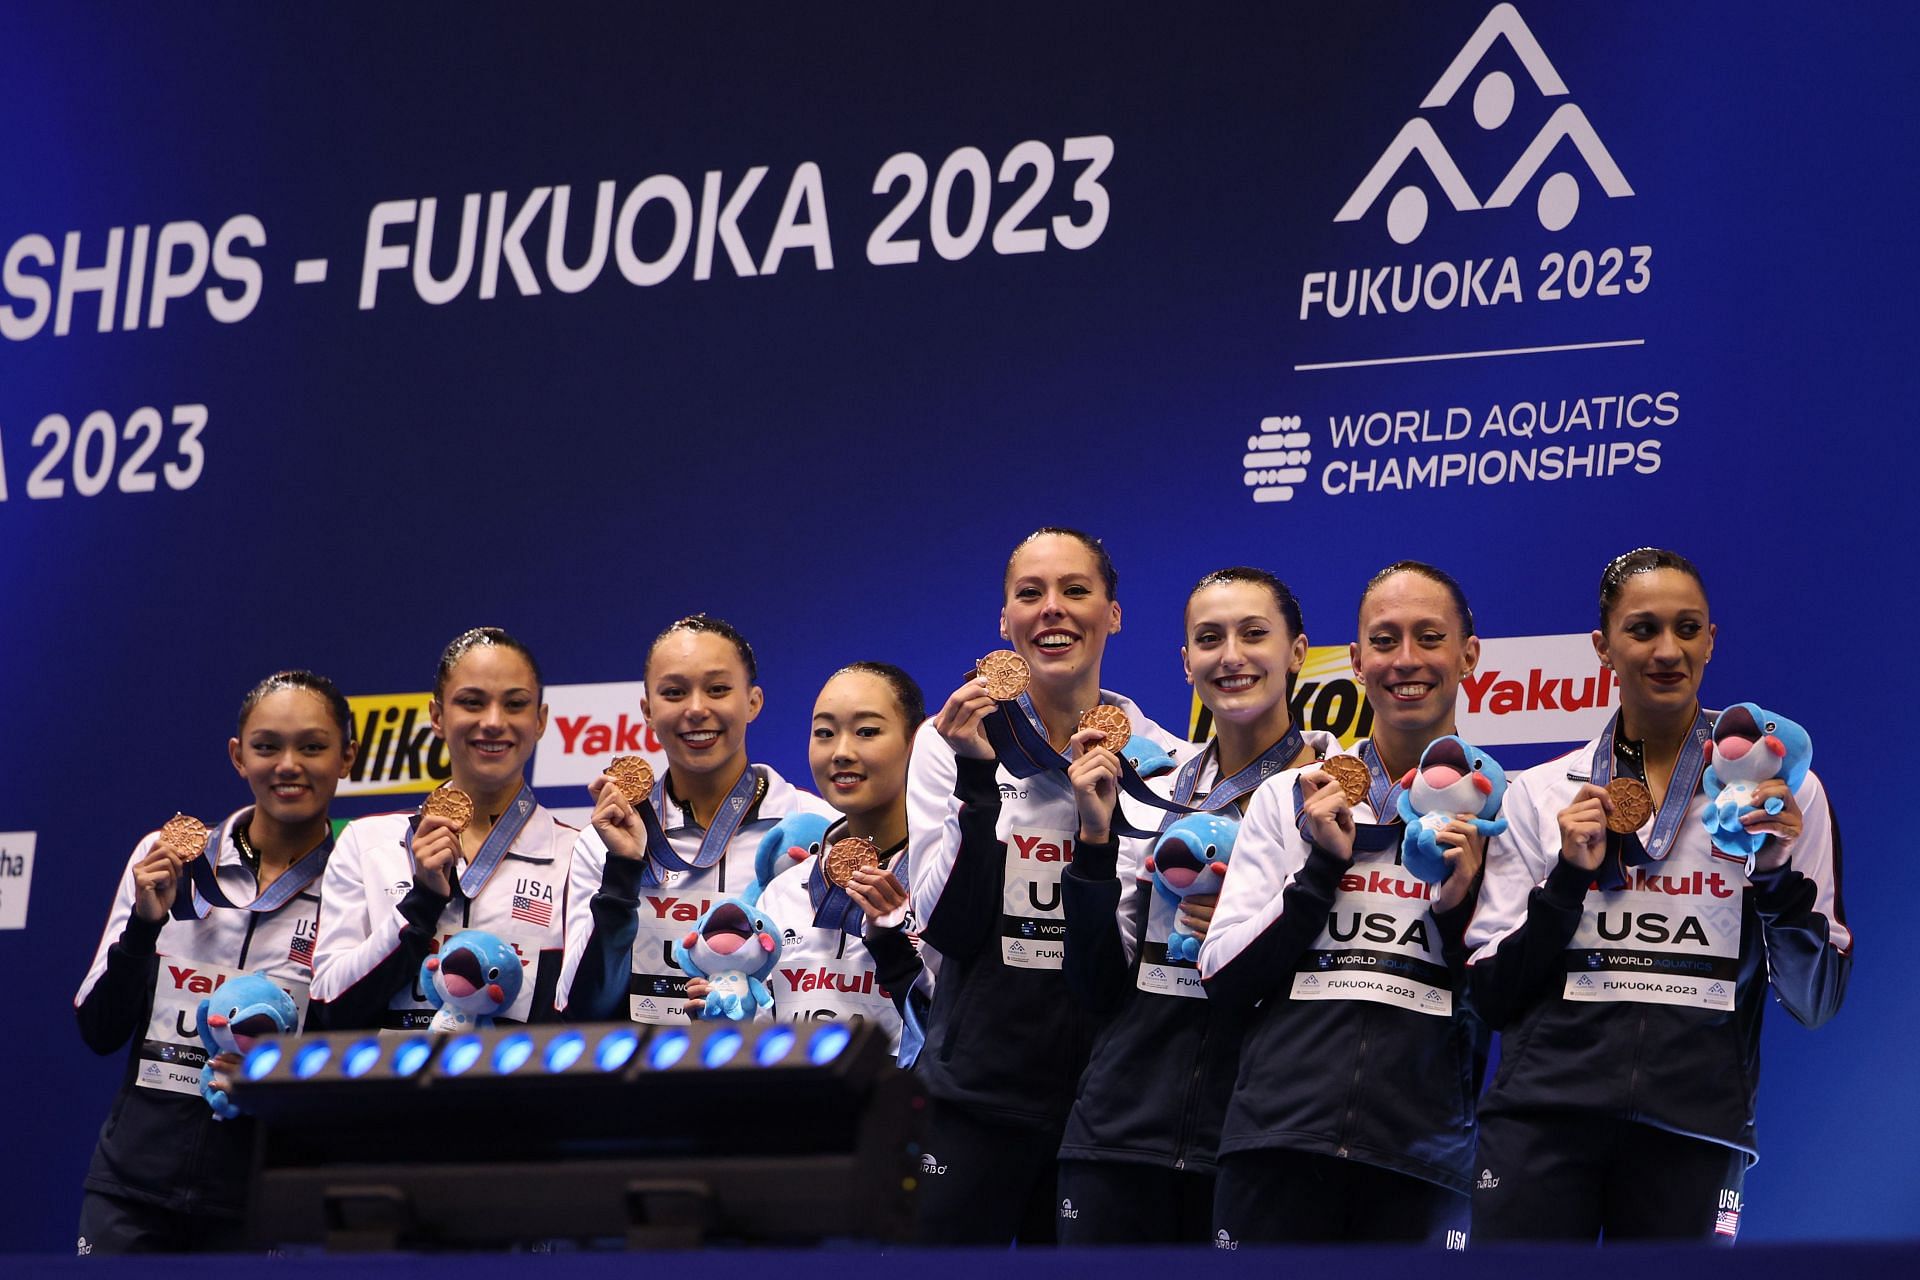 Team United States poses during the medal ceremony for the Artistic Swimming Team Technical Final at the 2023 World Aquatics Championships held at Marina Messe in Fukuoka, Japan